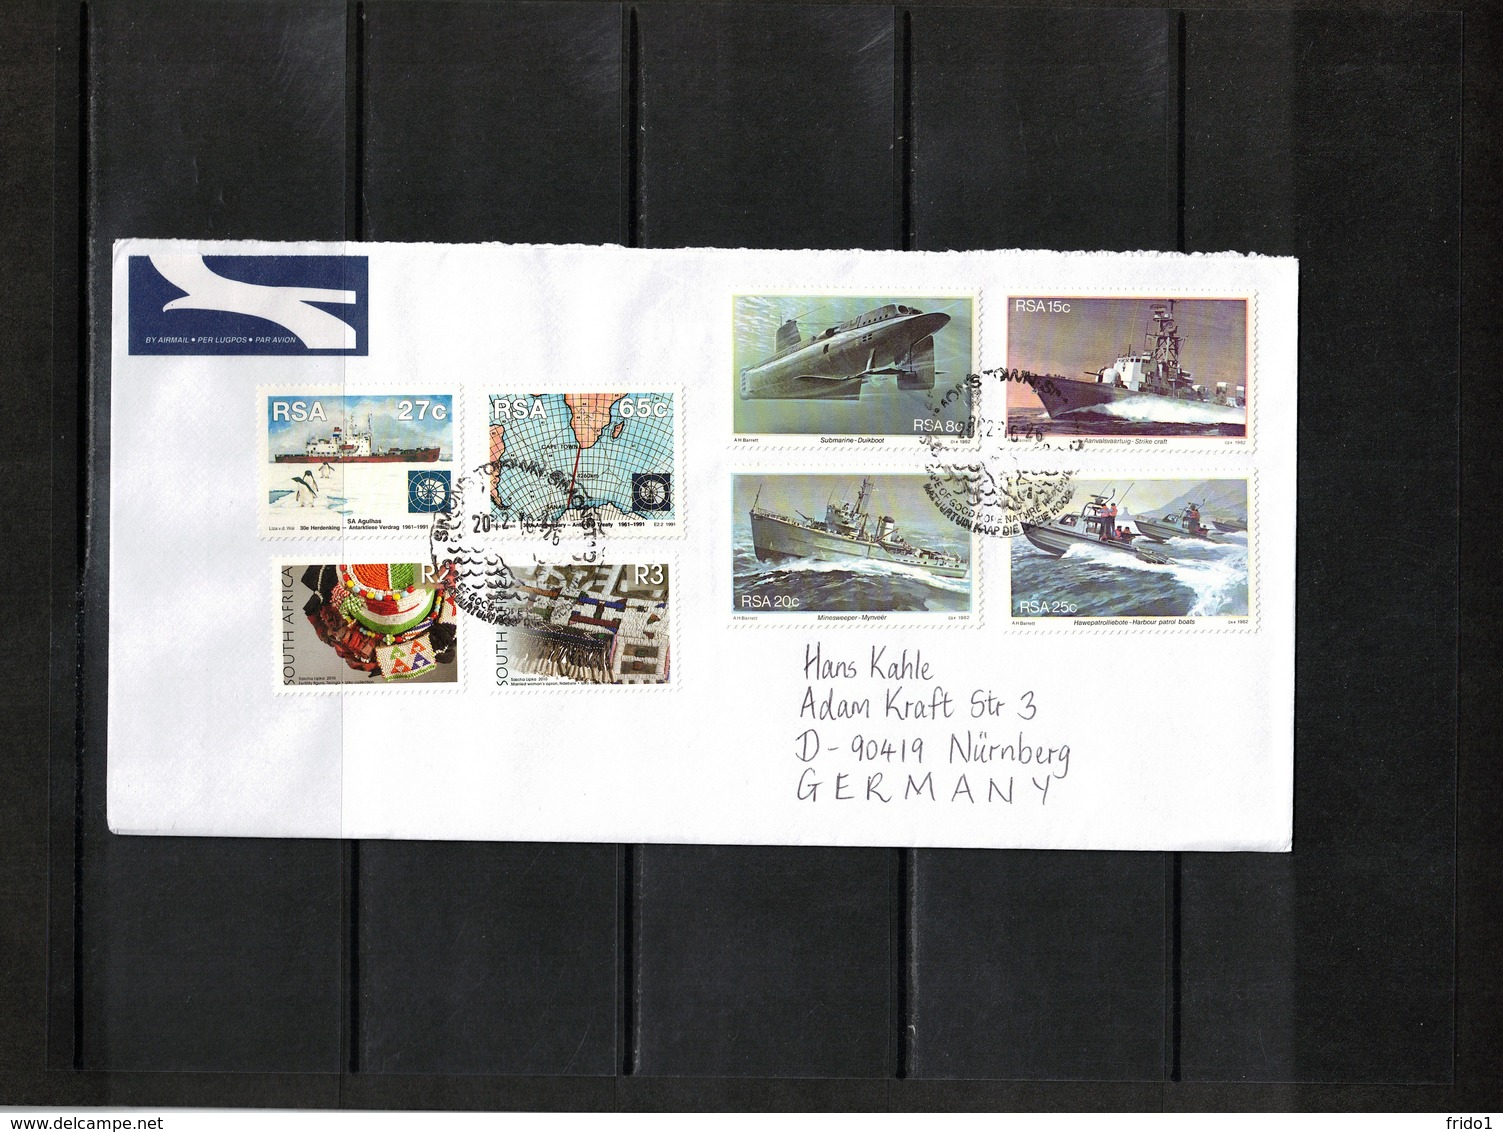 South Africa 2012 Interesting Airmail Letter - Covers & Documents